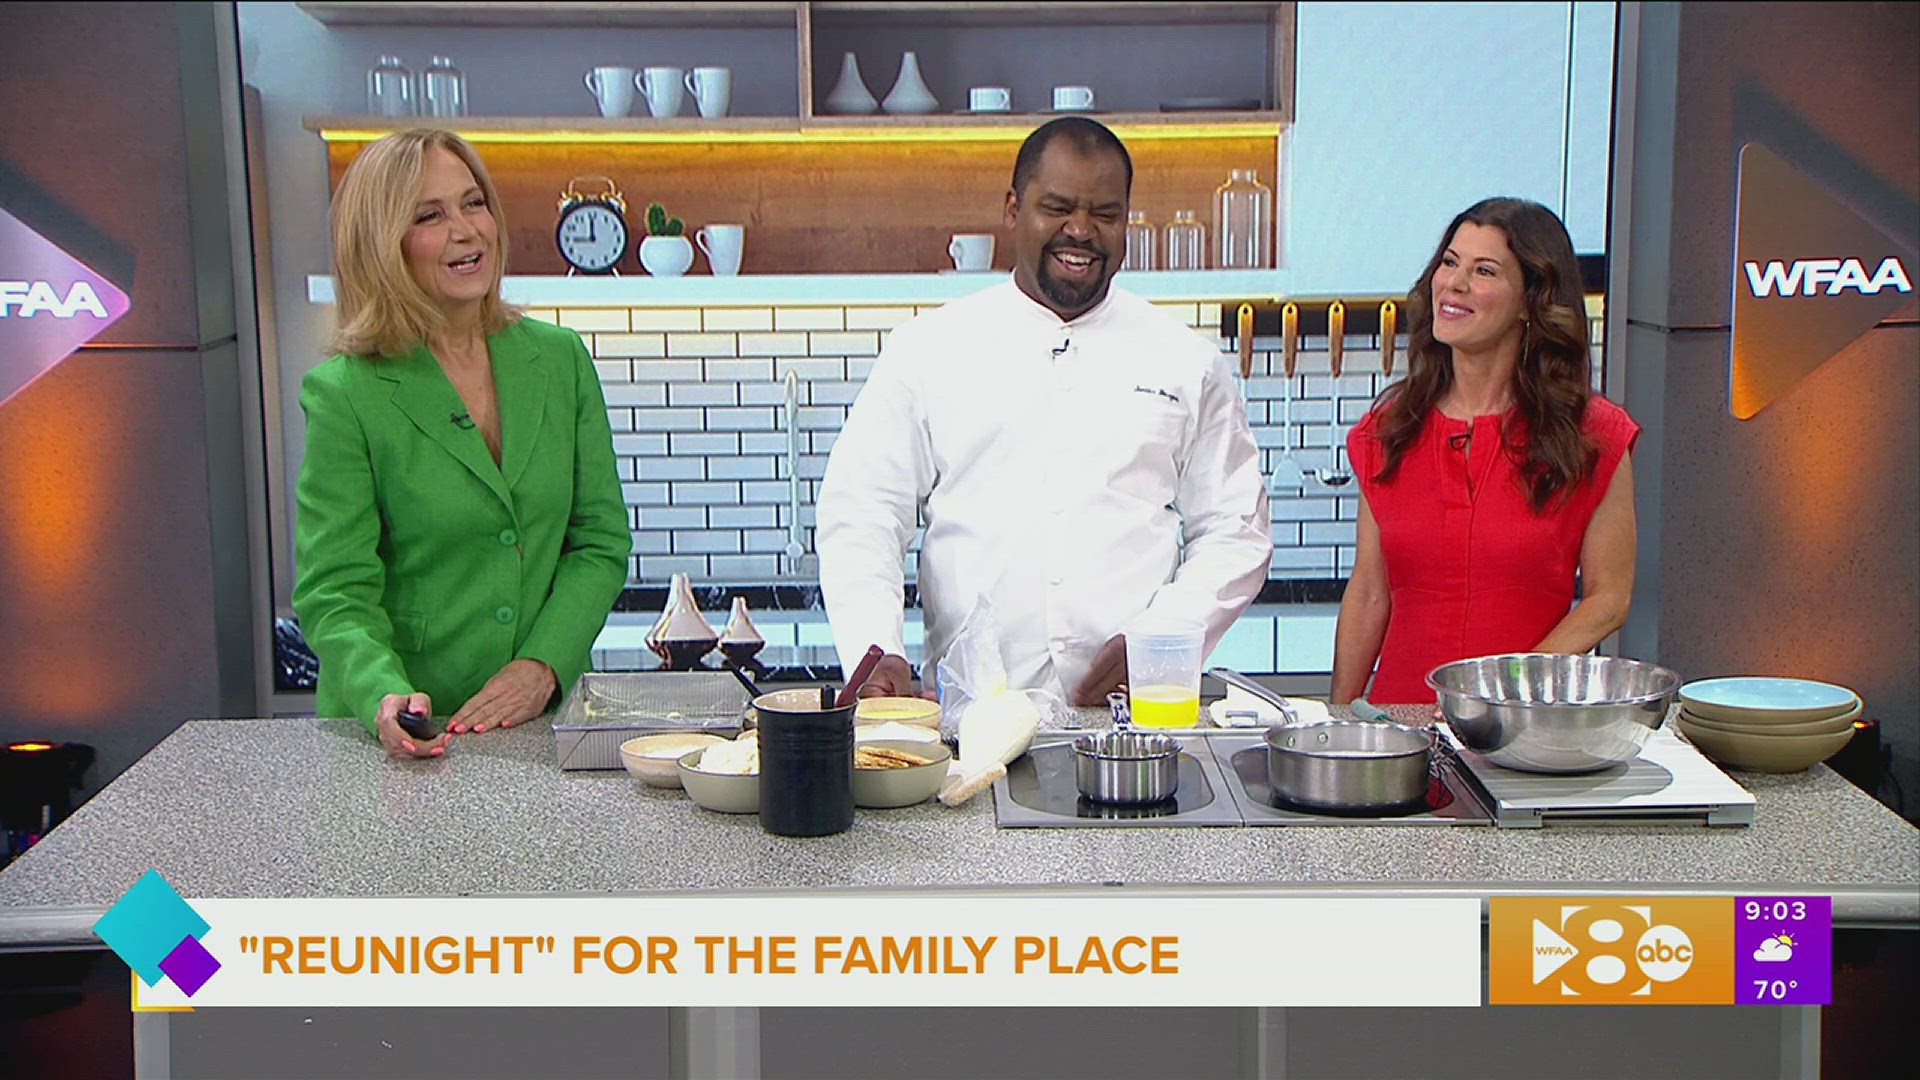 Chef Junior Borges of Meridian shares his grandmother's yuca and coconut cake recipe and previews the menu at the 10th Annual ReuNight for The Family Place